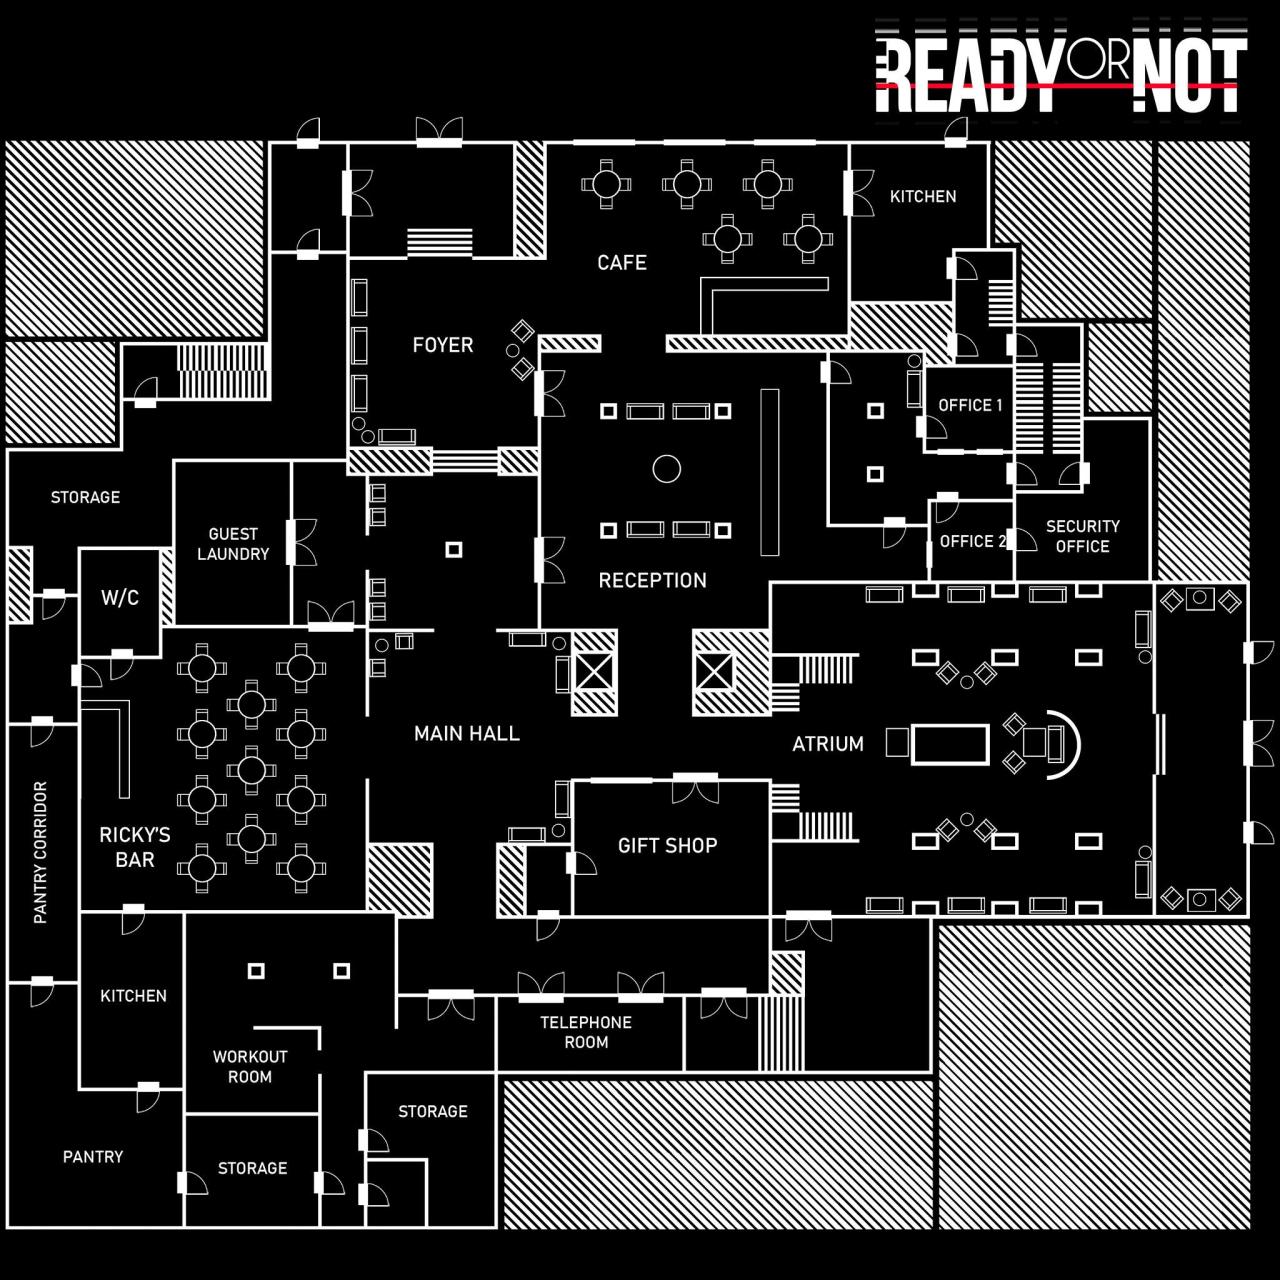 Ready or Not All Maps Background Stories, Tips and Blueprints